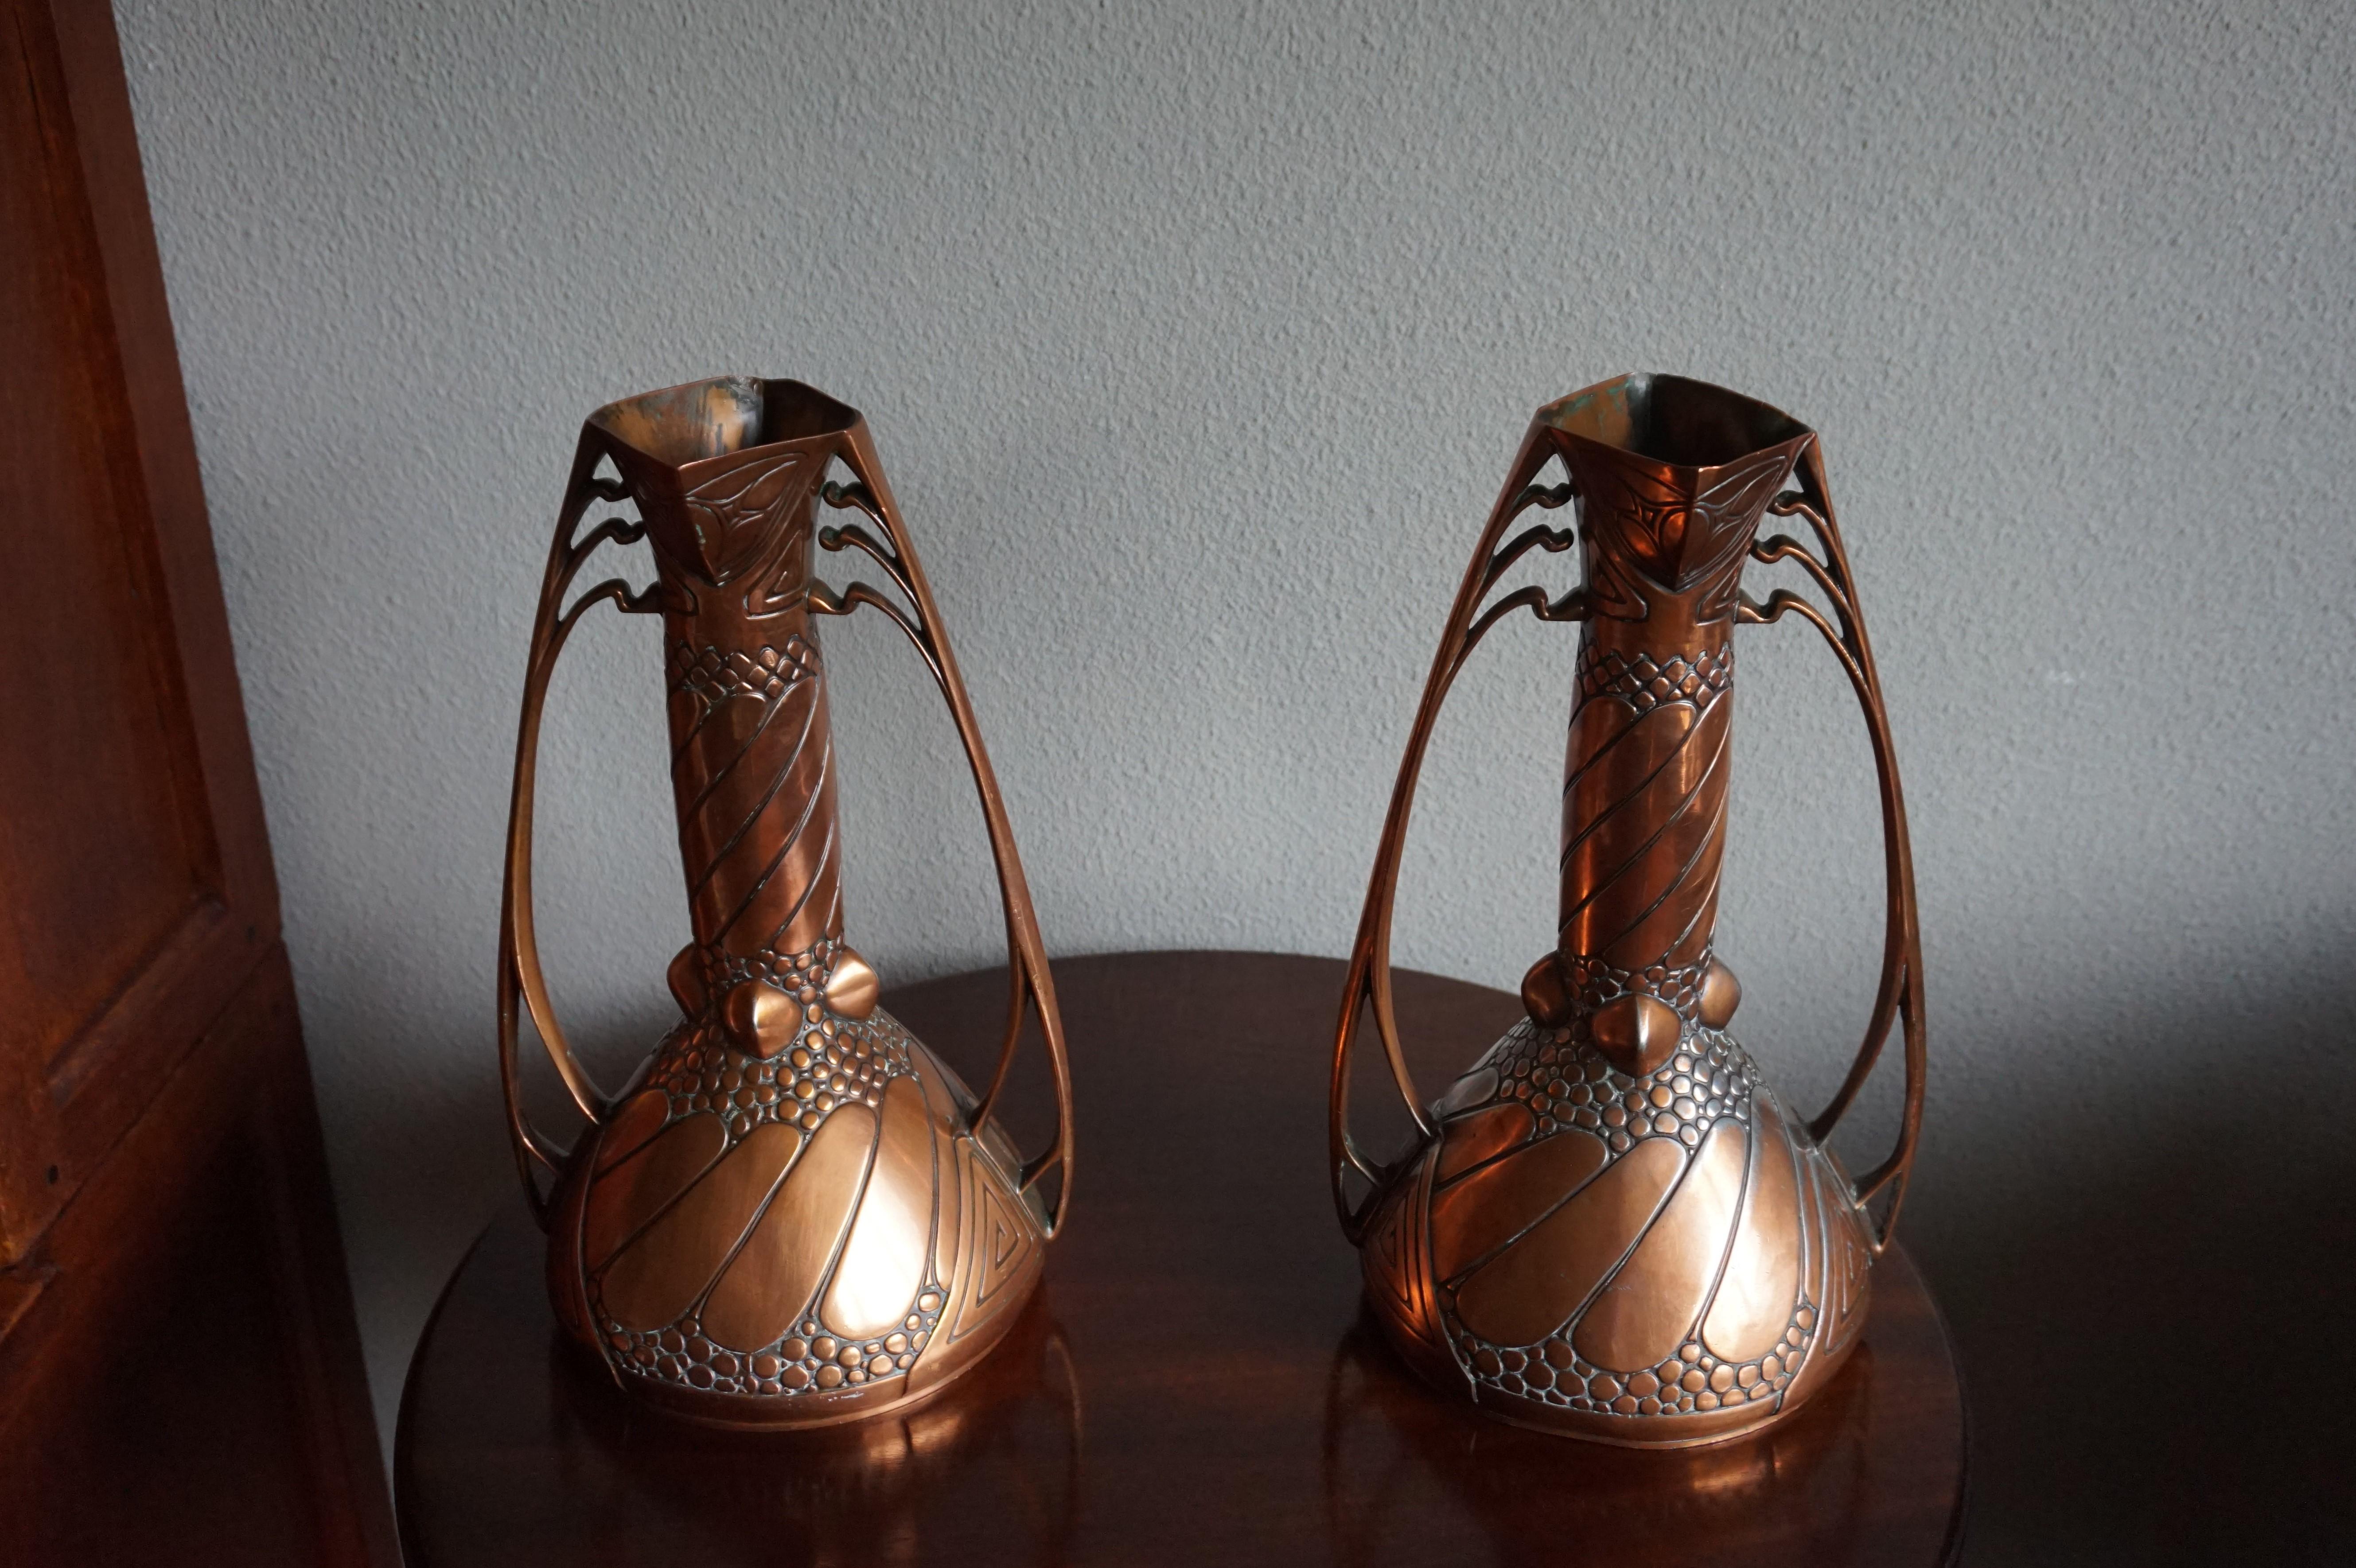 Antique Pair of Embossed Copper Arts and Crafts Vases by Carl Deffner, Germany 1